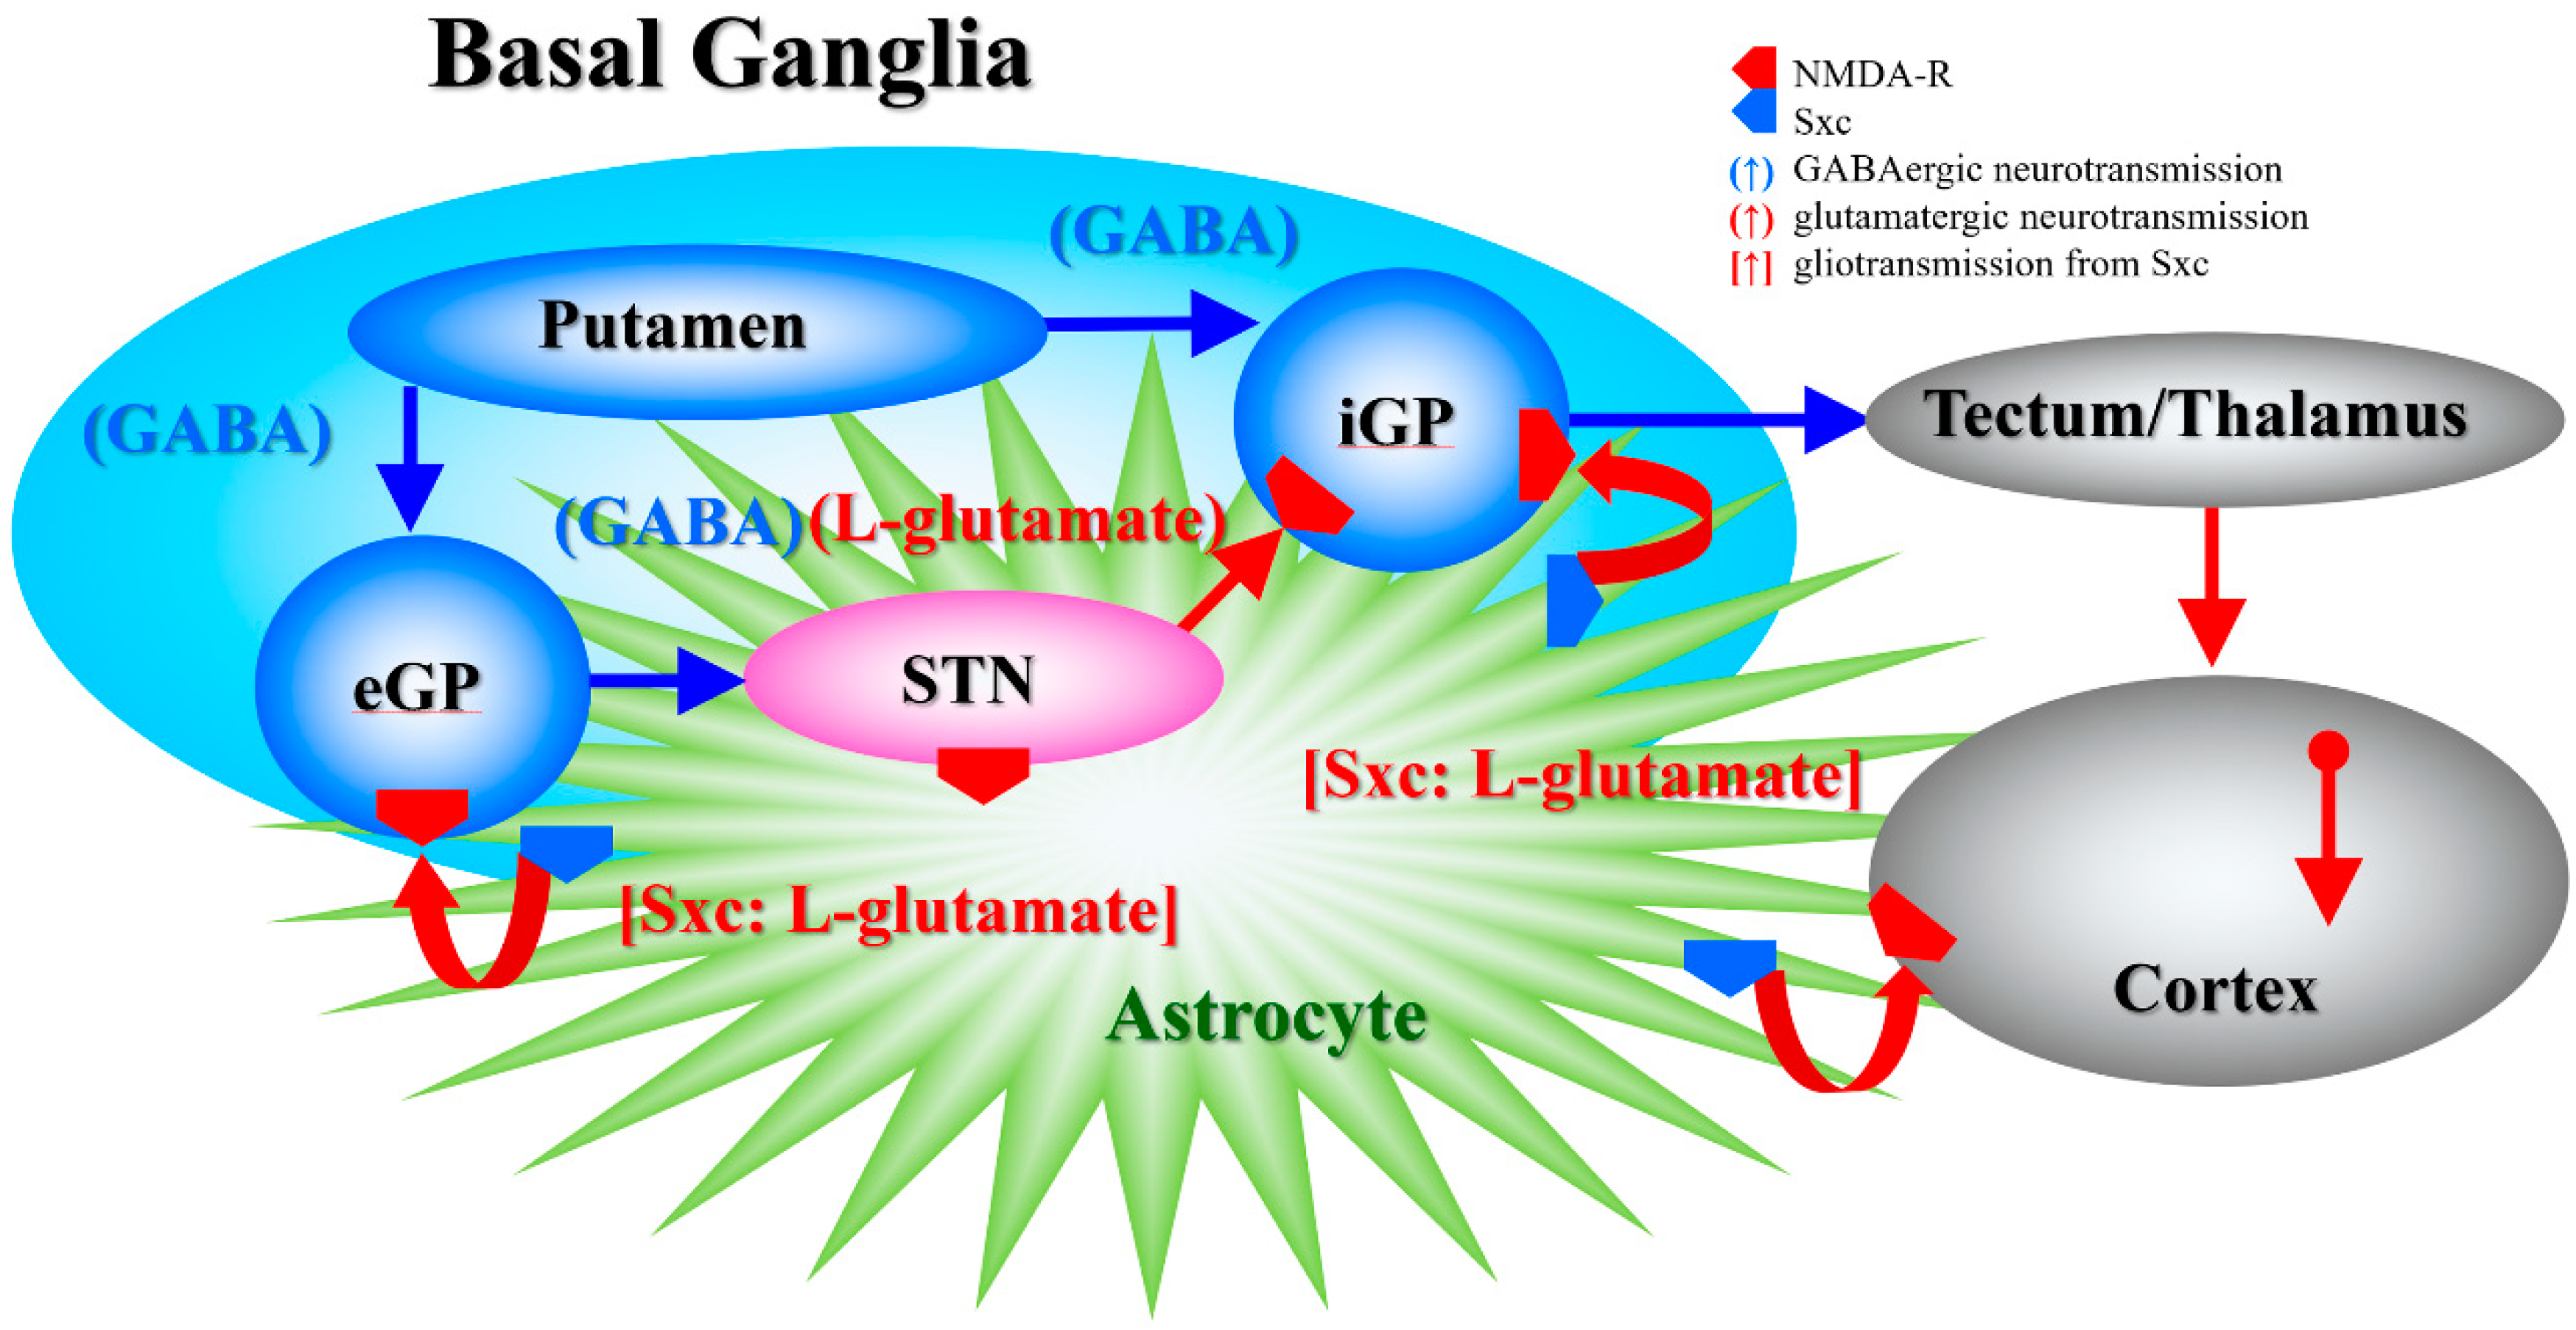 Biomolecules Free Full Text Amantadine Combines Astroglial System Xc Activation With Glutamate Nmda Receptor Inhibition Html